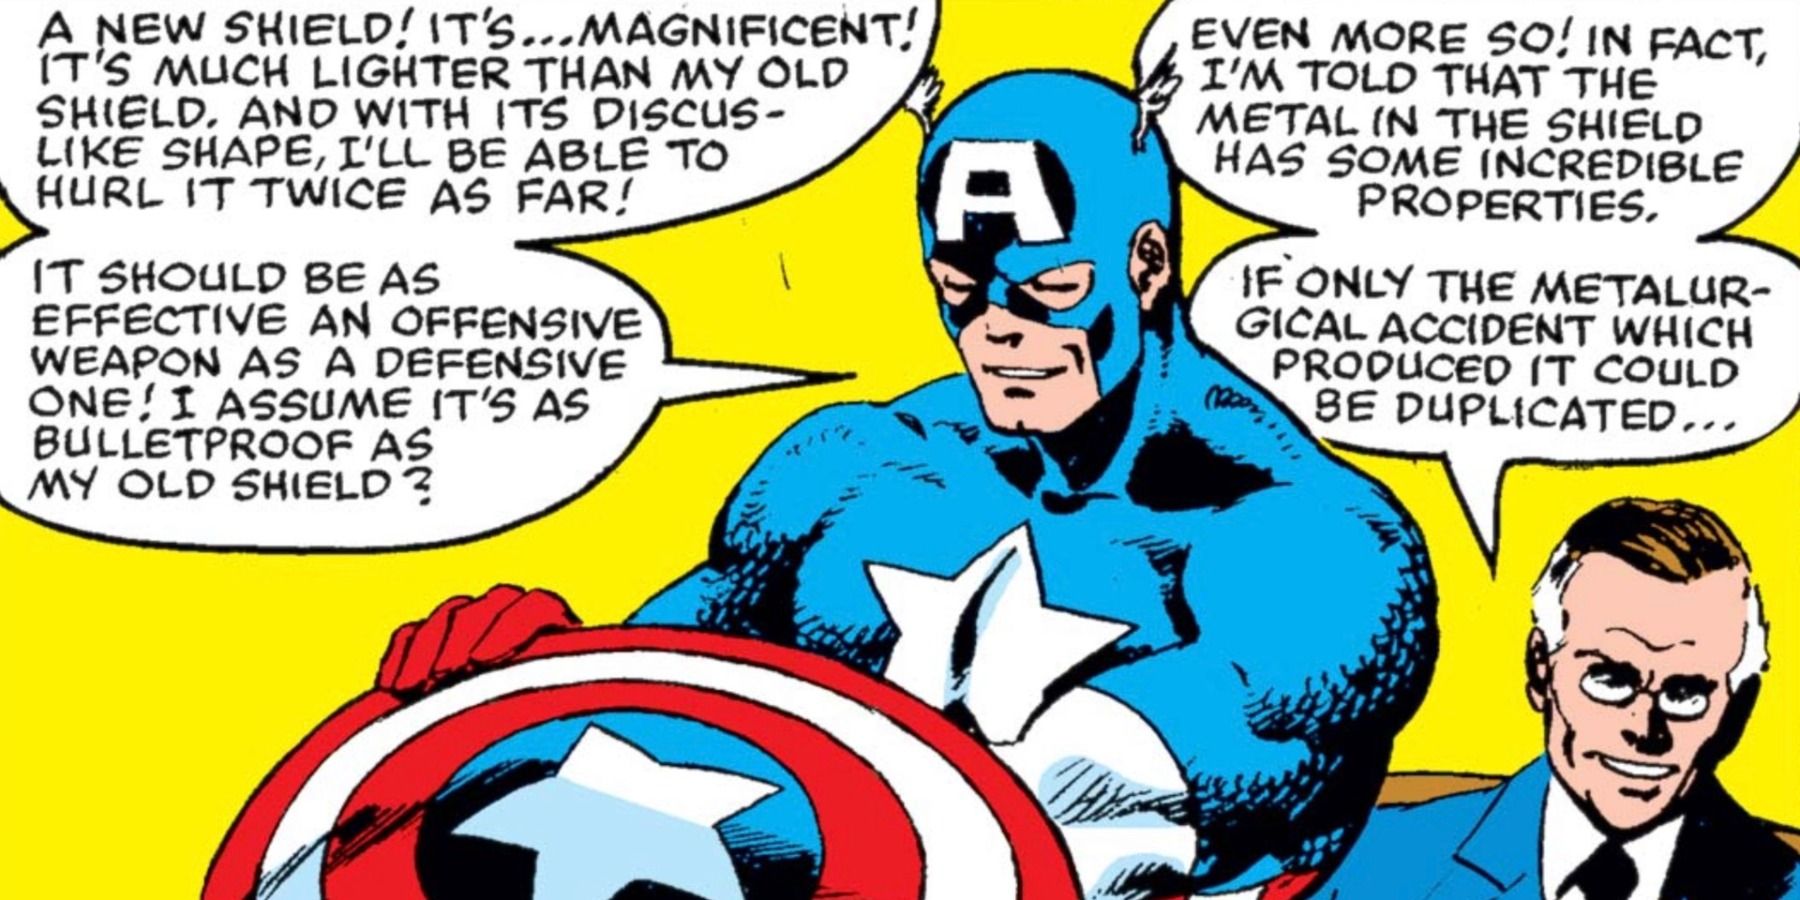 President Franklin Roosevelt giving the shield to Captain America